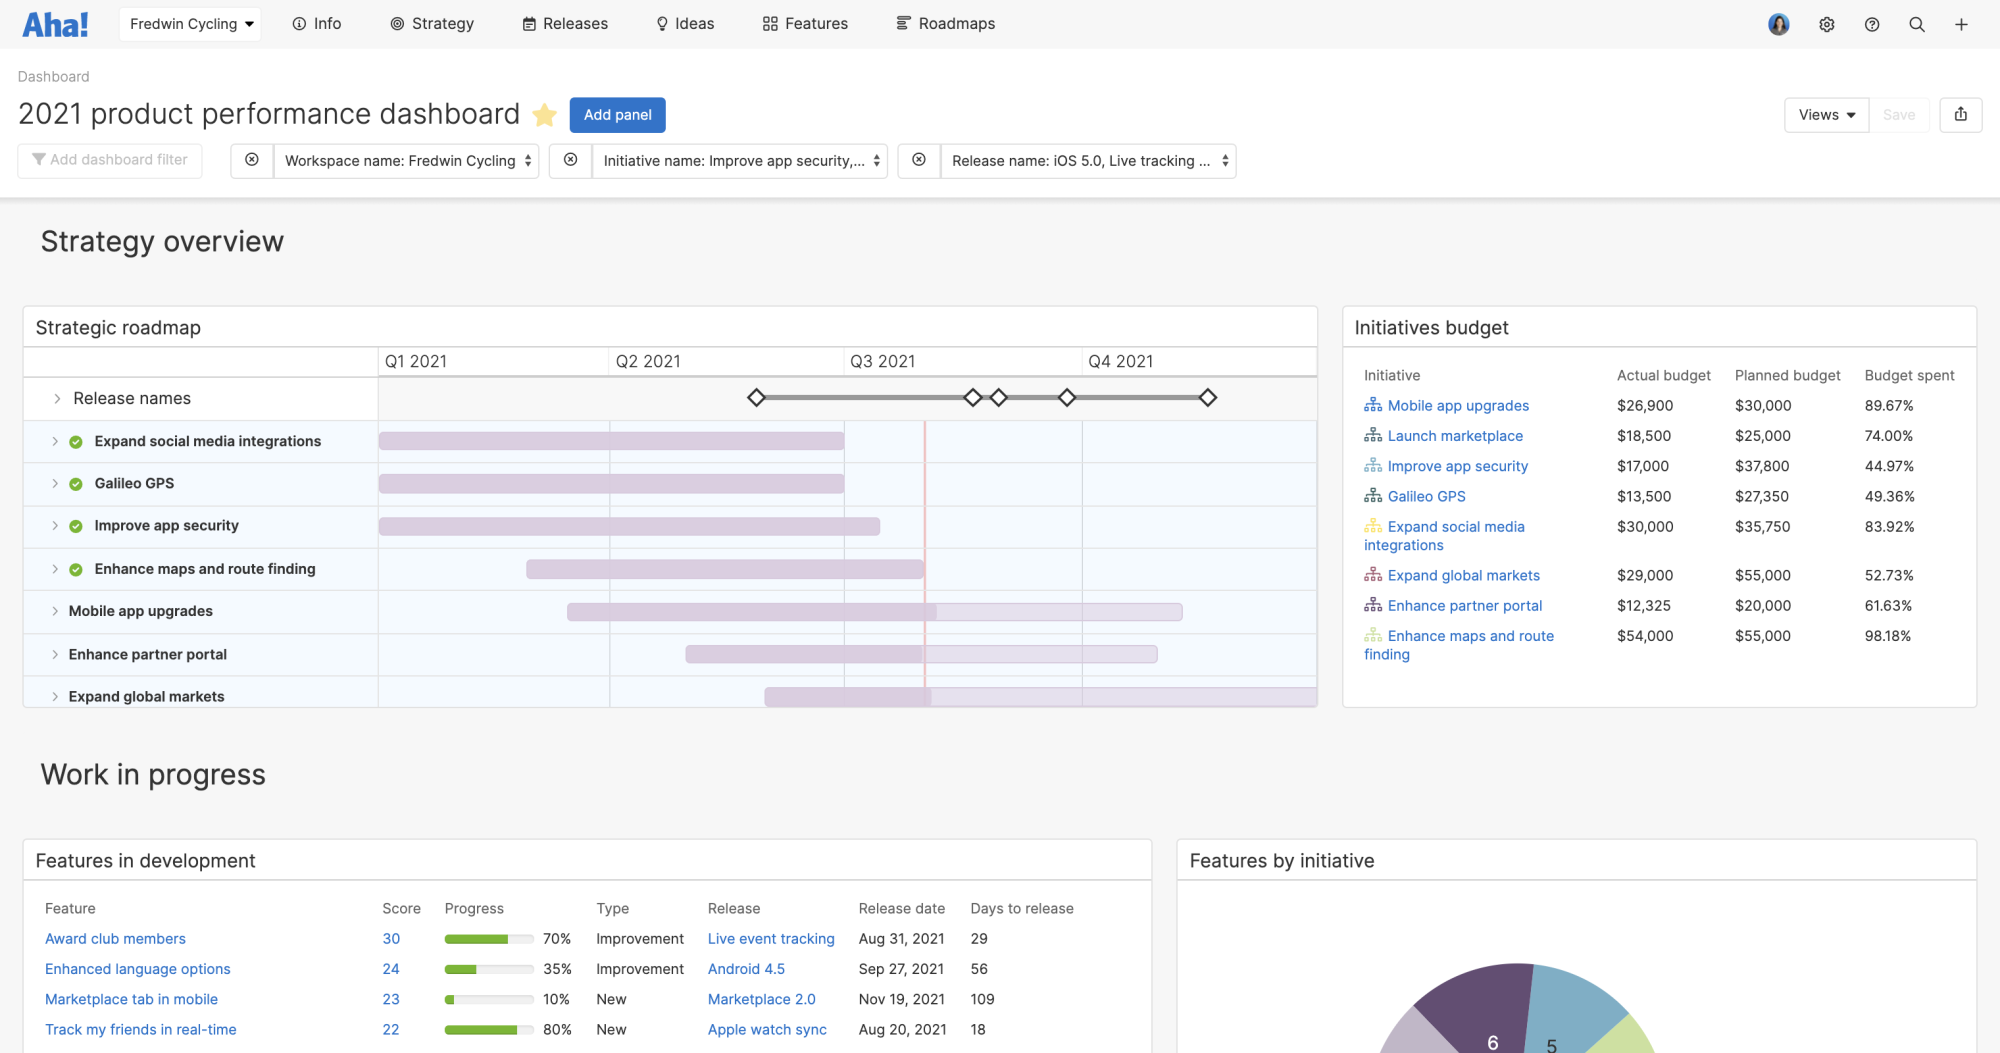 Configure one dashboard to share product metrics and apply filters to focus the data.